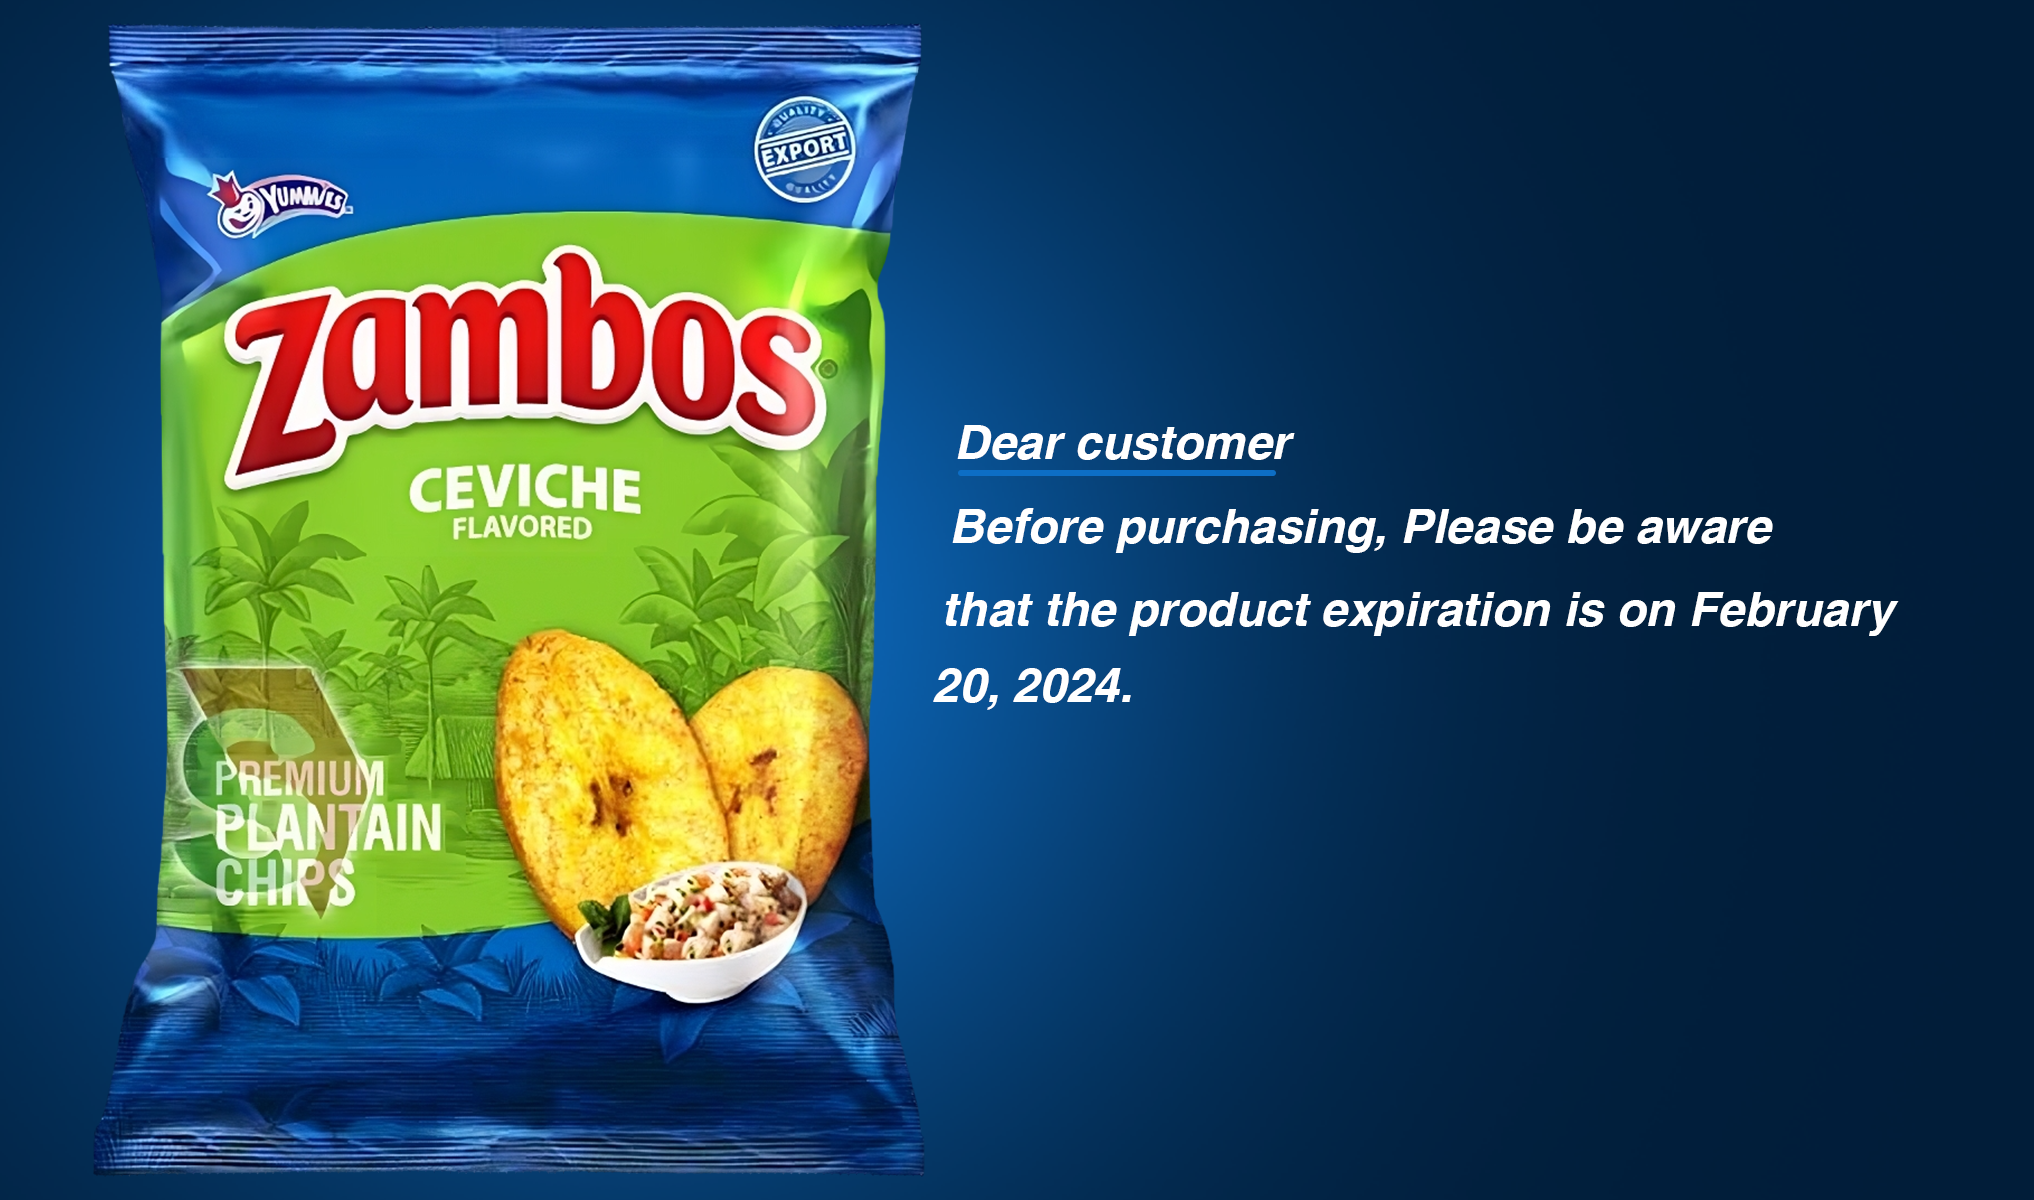 Zambos Plantain Chips – Delicious Plantain Chips originals || CEVICHE Premium Plantain chips || crunchy and delicious || (5.29 oz. /150g)